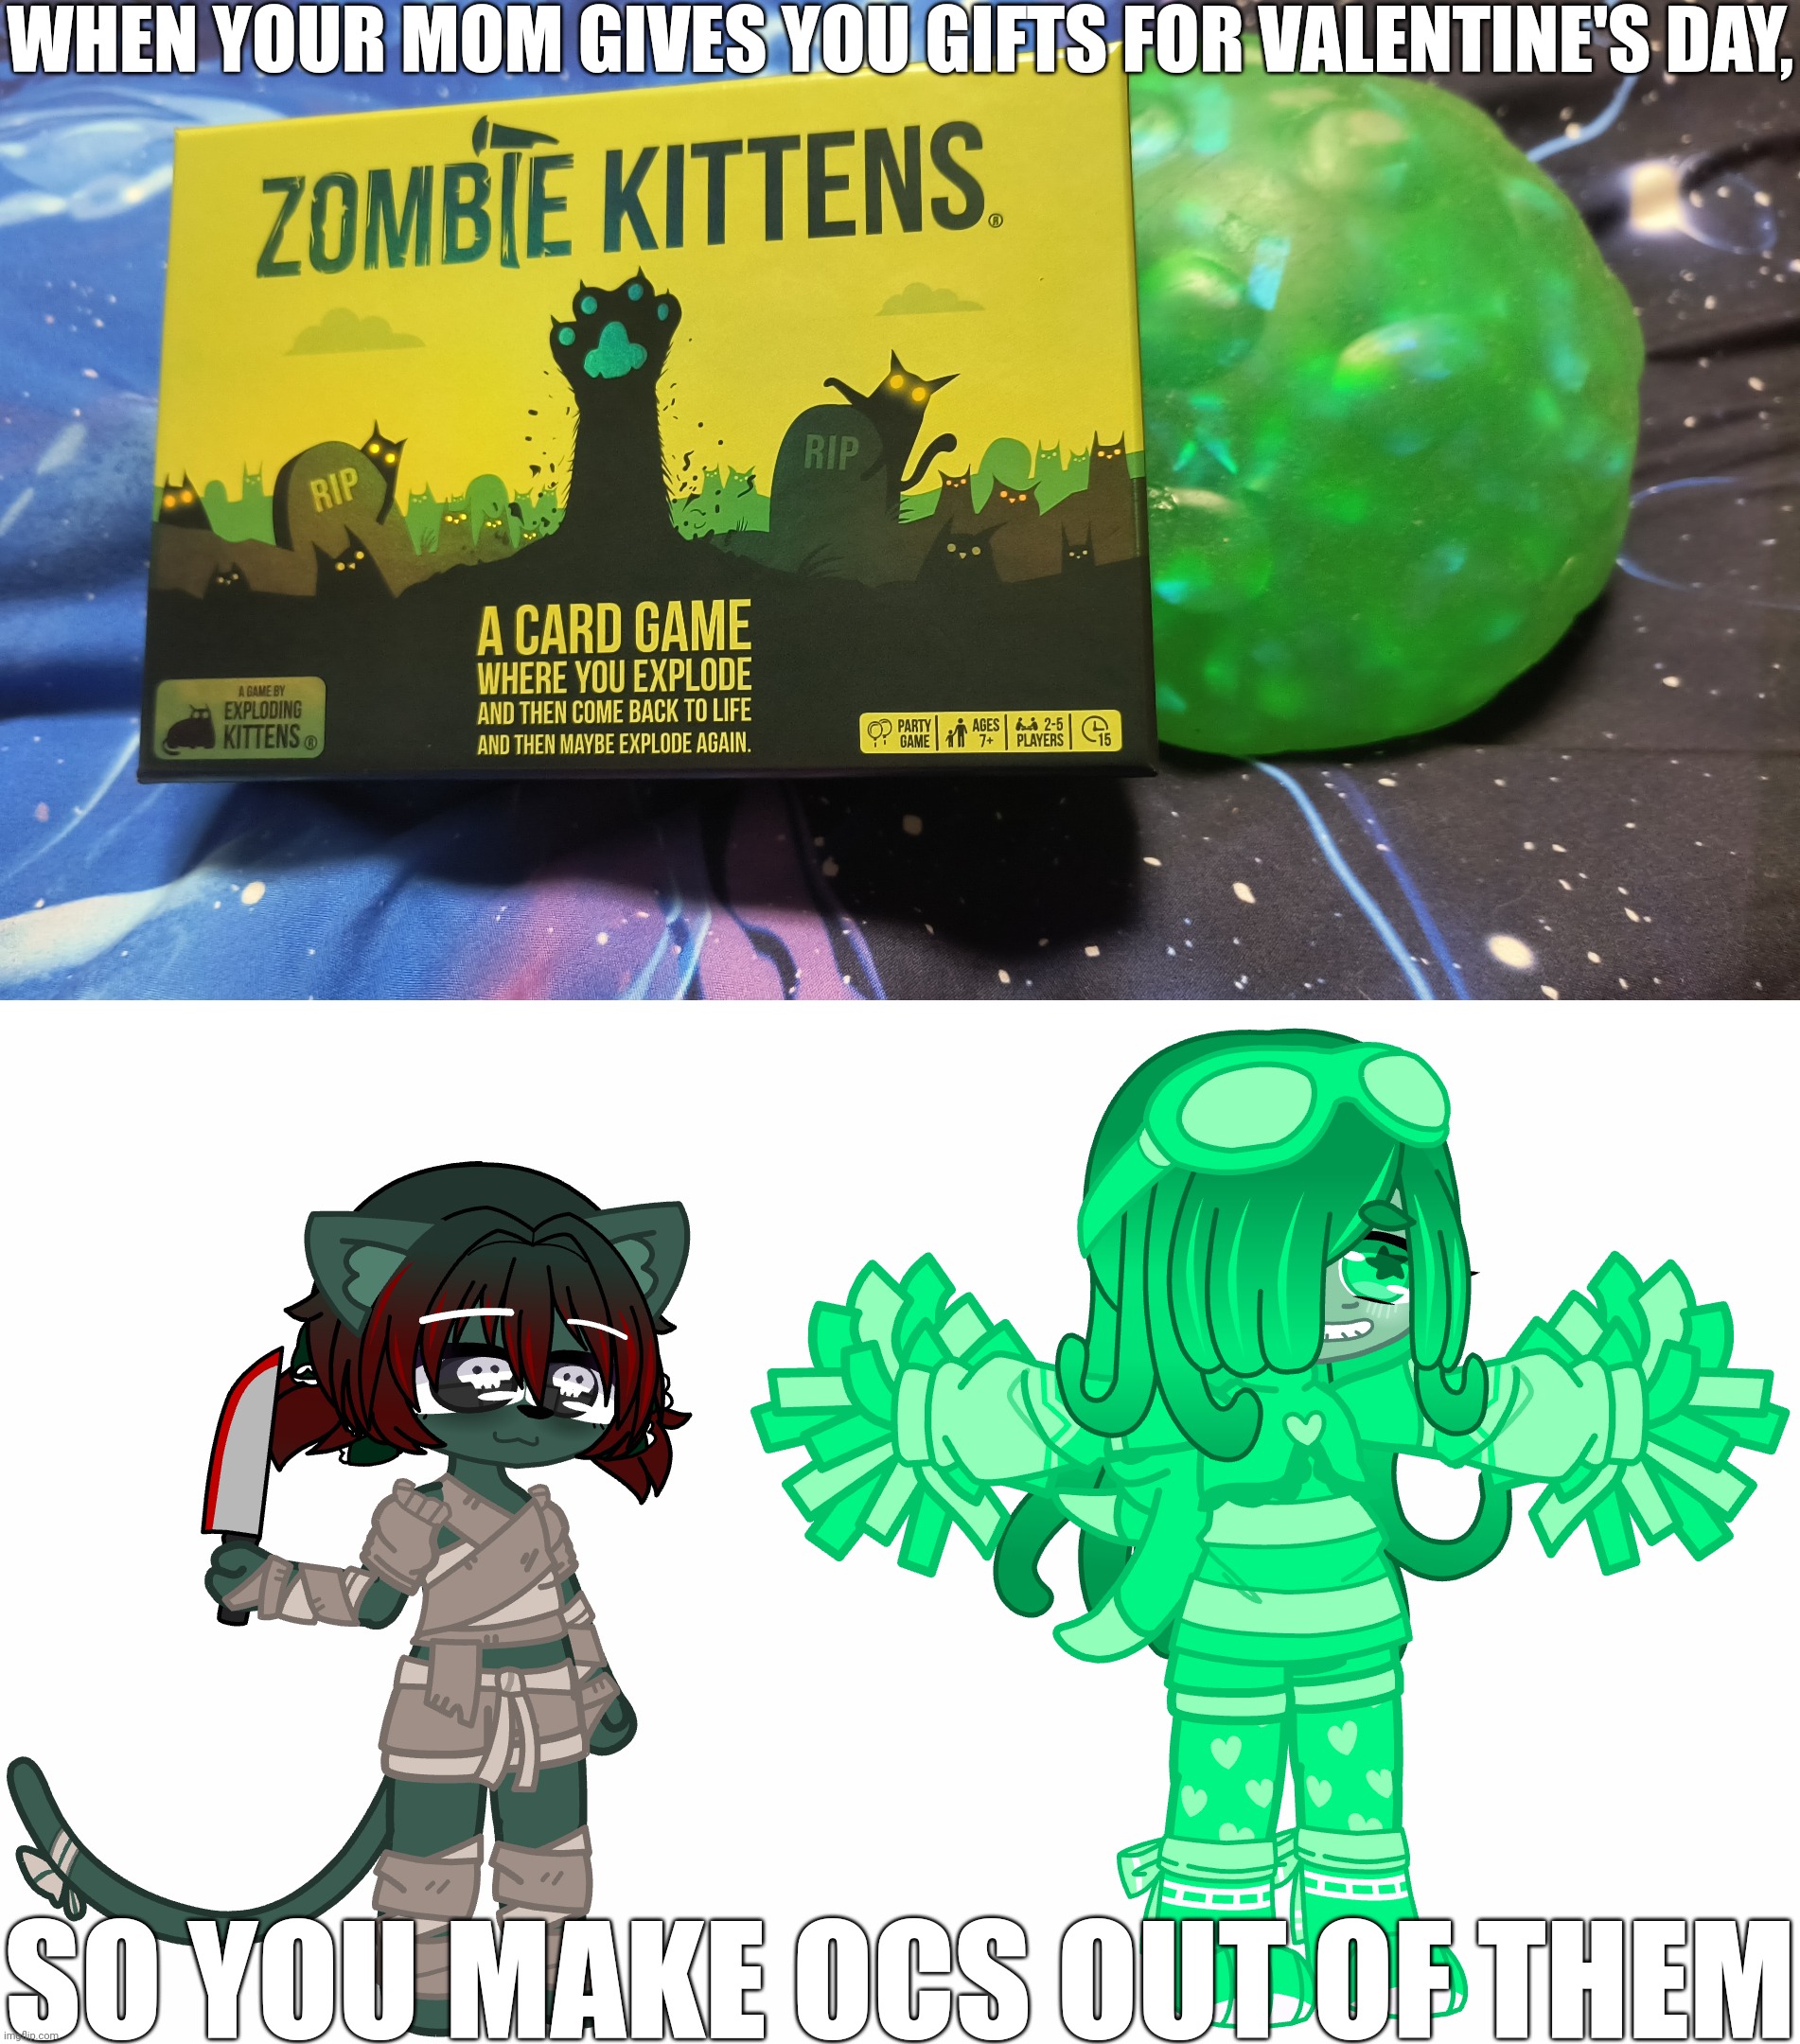 yes it's been six days since Valentine's Day but idc | WHEN YOUR MOM GIVES YOU GIFTS FOR VALENTINE'S DAY, SO YOU MAKE OCS OUT OF THEM | image tagged in gifts,ocs,zombie kittens,squishy ball | made w/ Imgflip meme maker